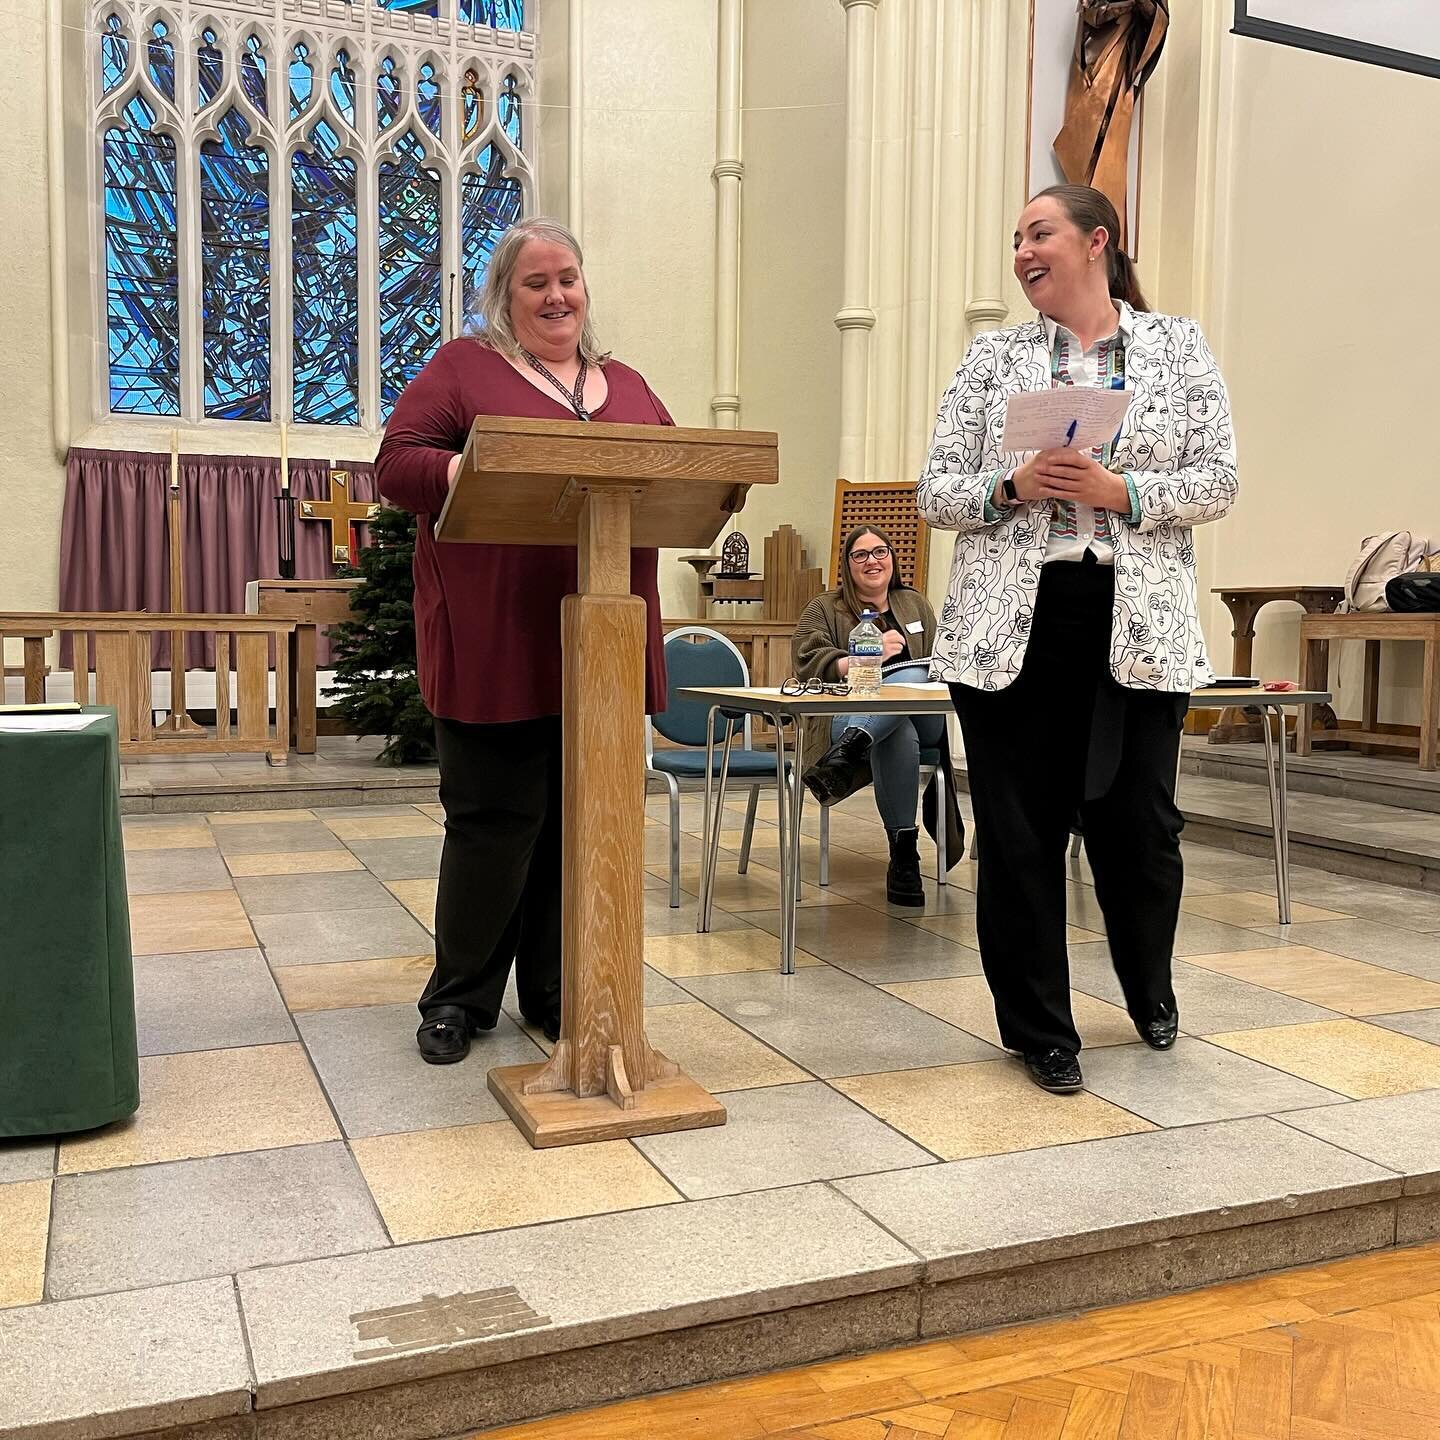 Thank you so much to everyone who made it out to our AGM today. It is always a special event for us as hearing from our survivors, volunteers and trustees brings so much positivity when facing the new year! 

Thank you to Lydia from DACT for speaking